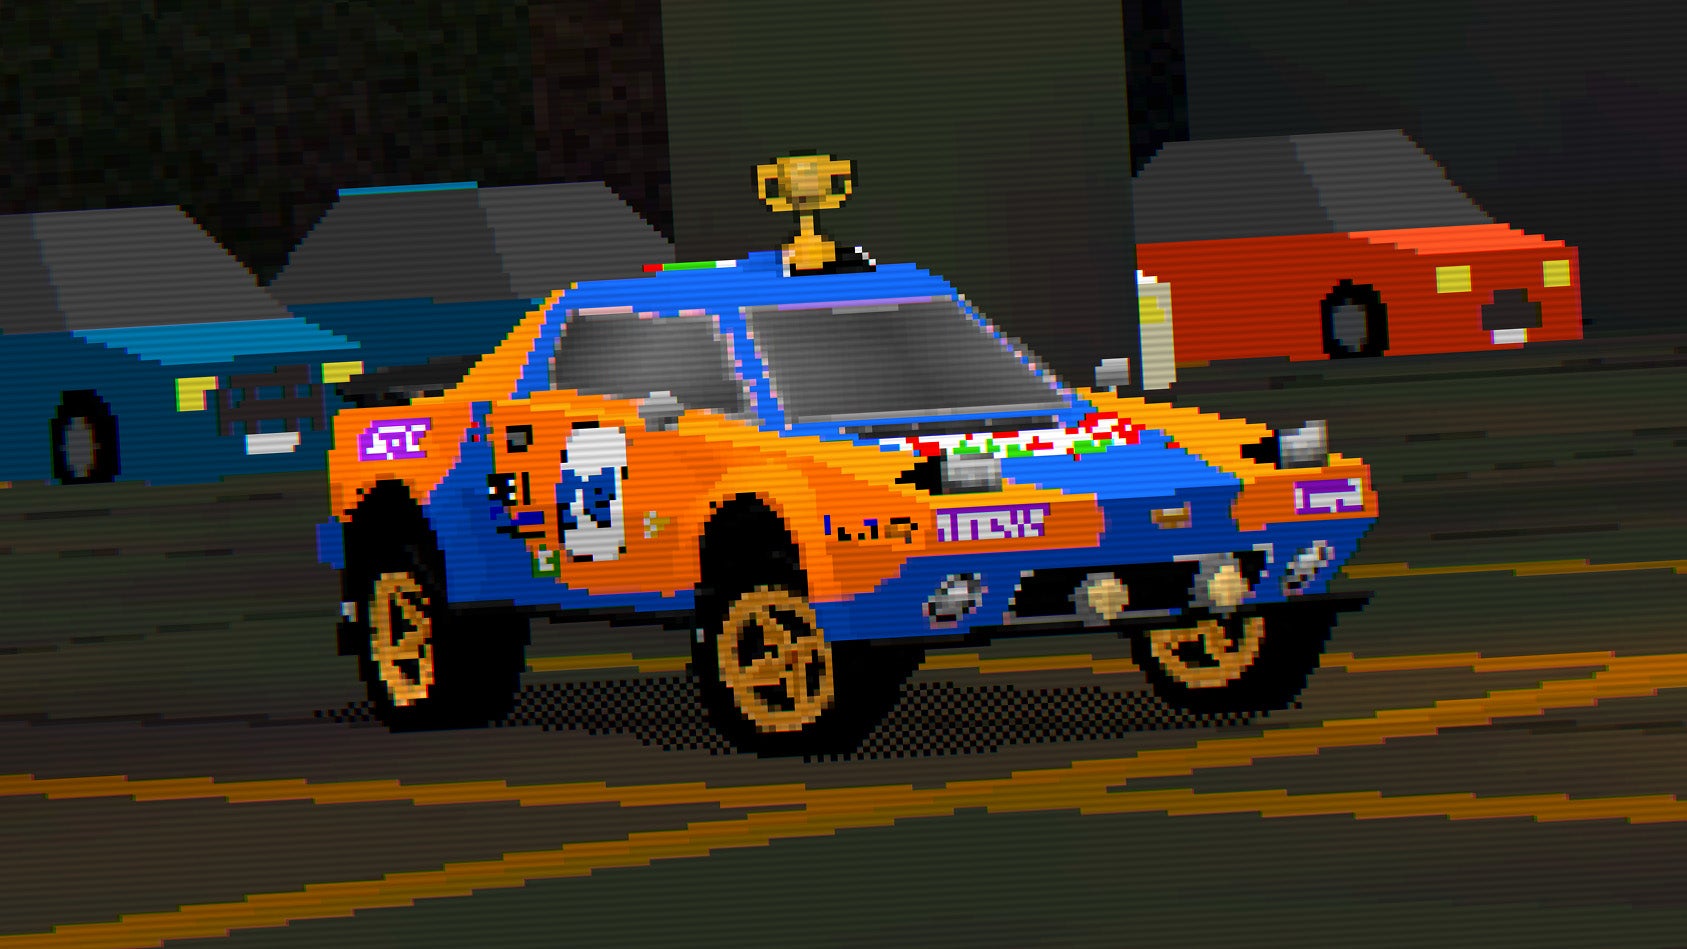 The Parking Garage Rally Circuit brings back the nostalgia of 90s arcade racing in all its glory.